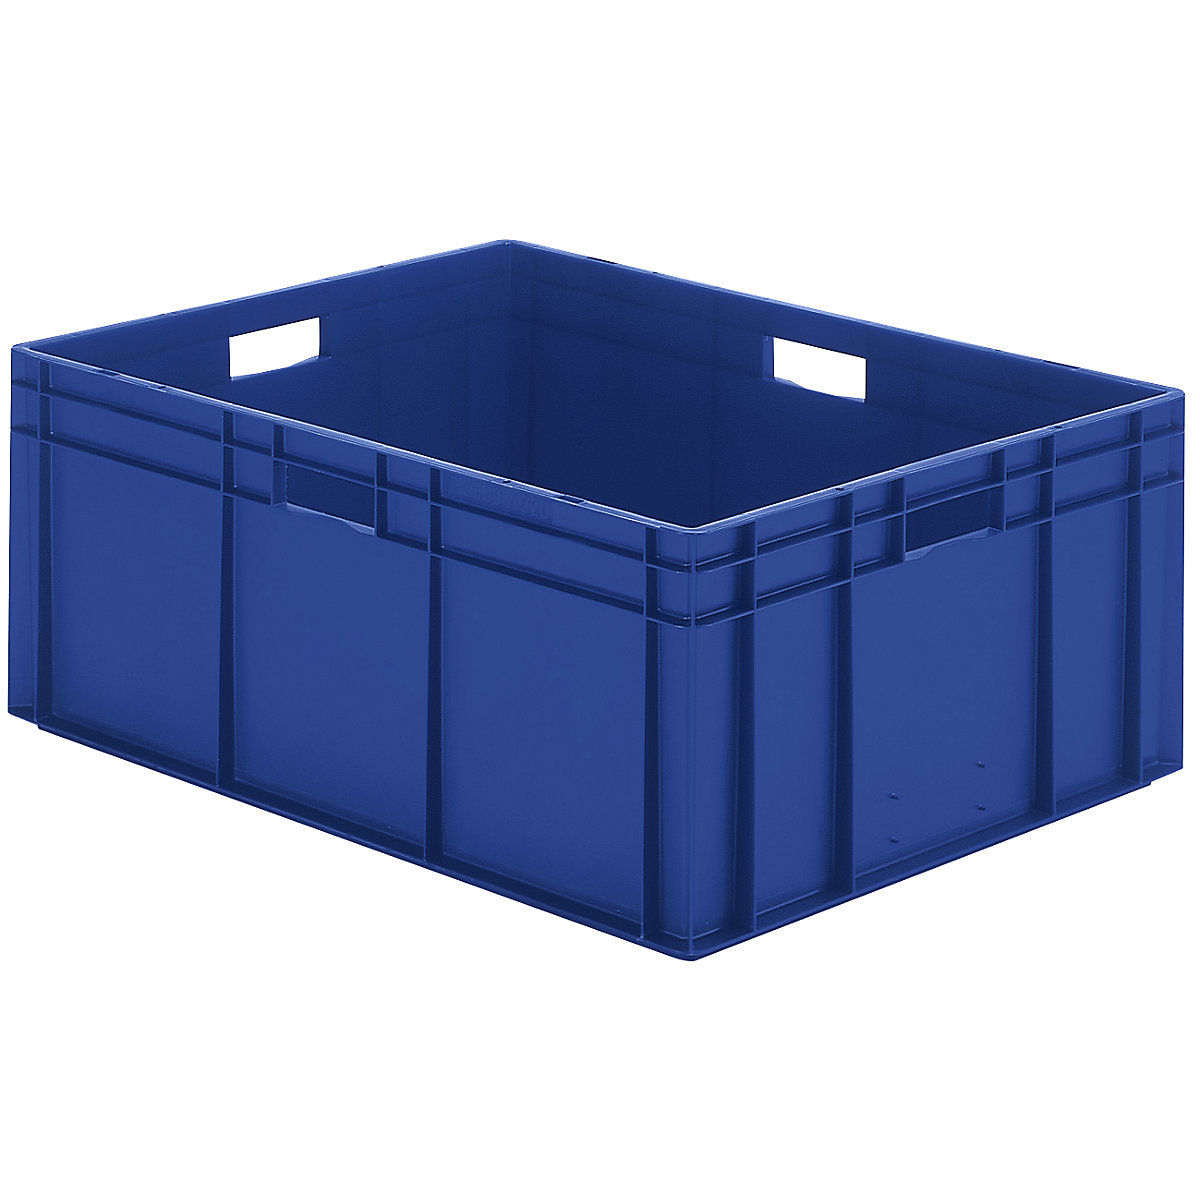 Euro stacking container, closed walls and base, LxWxH 800 x 600 x 320 mm, blue, pack of 2